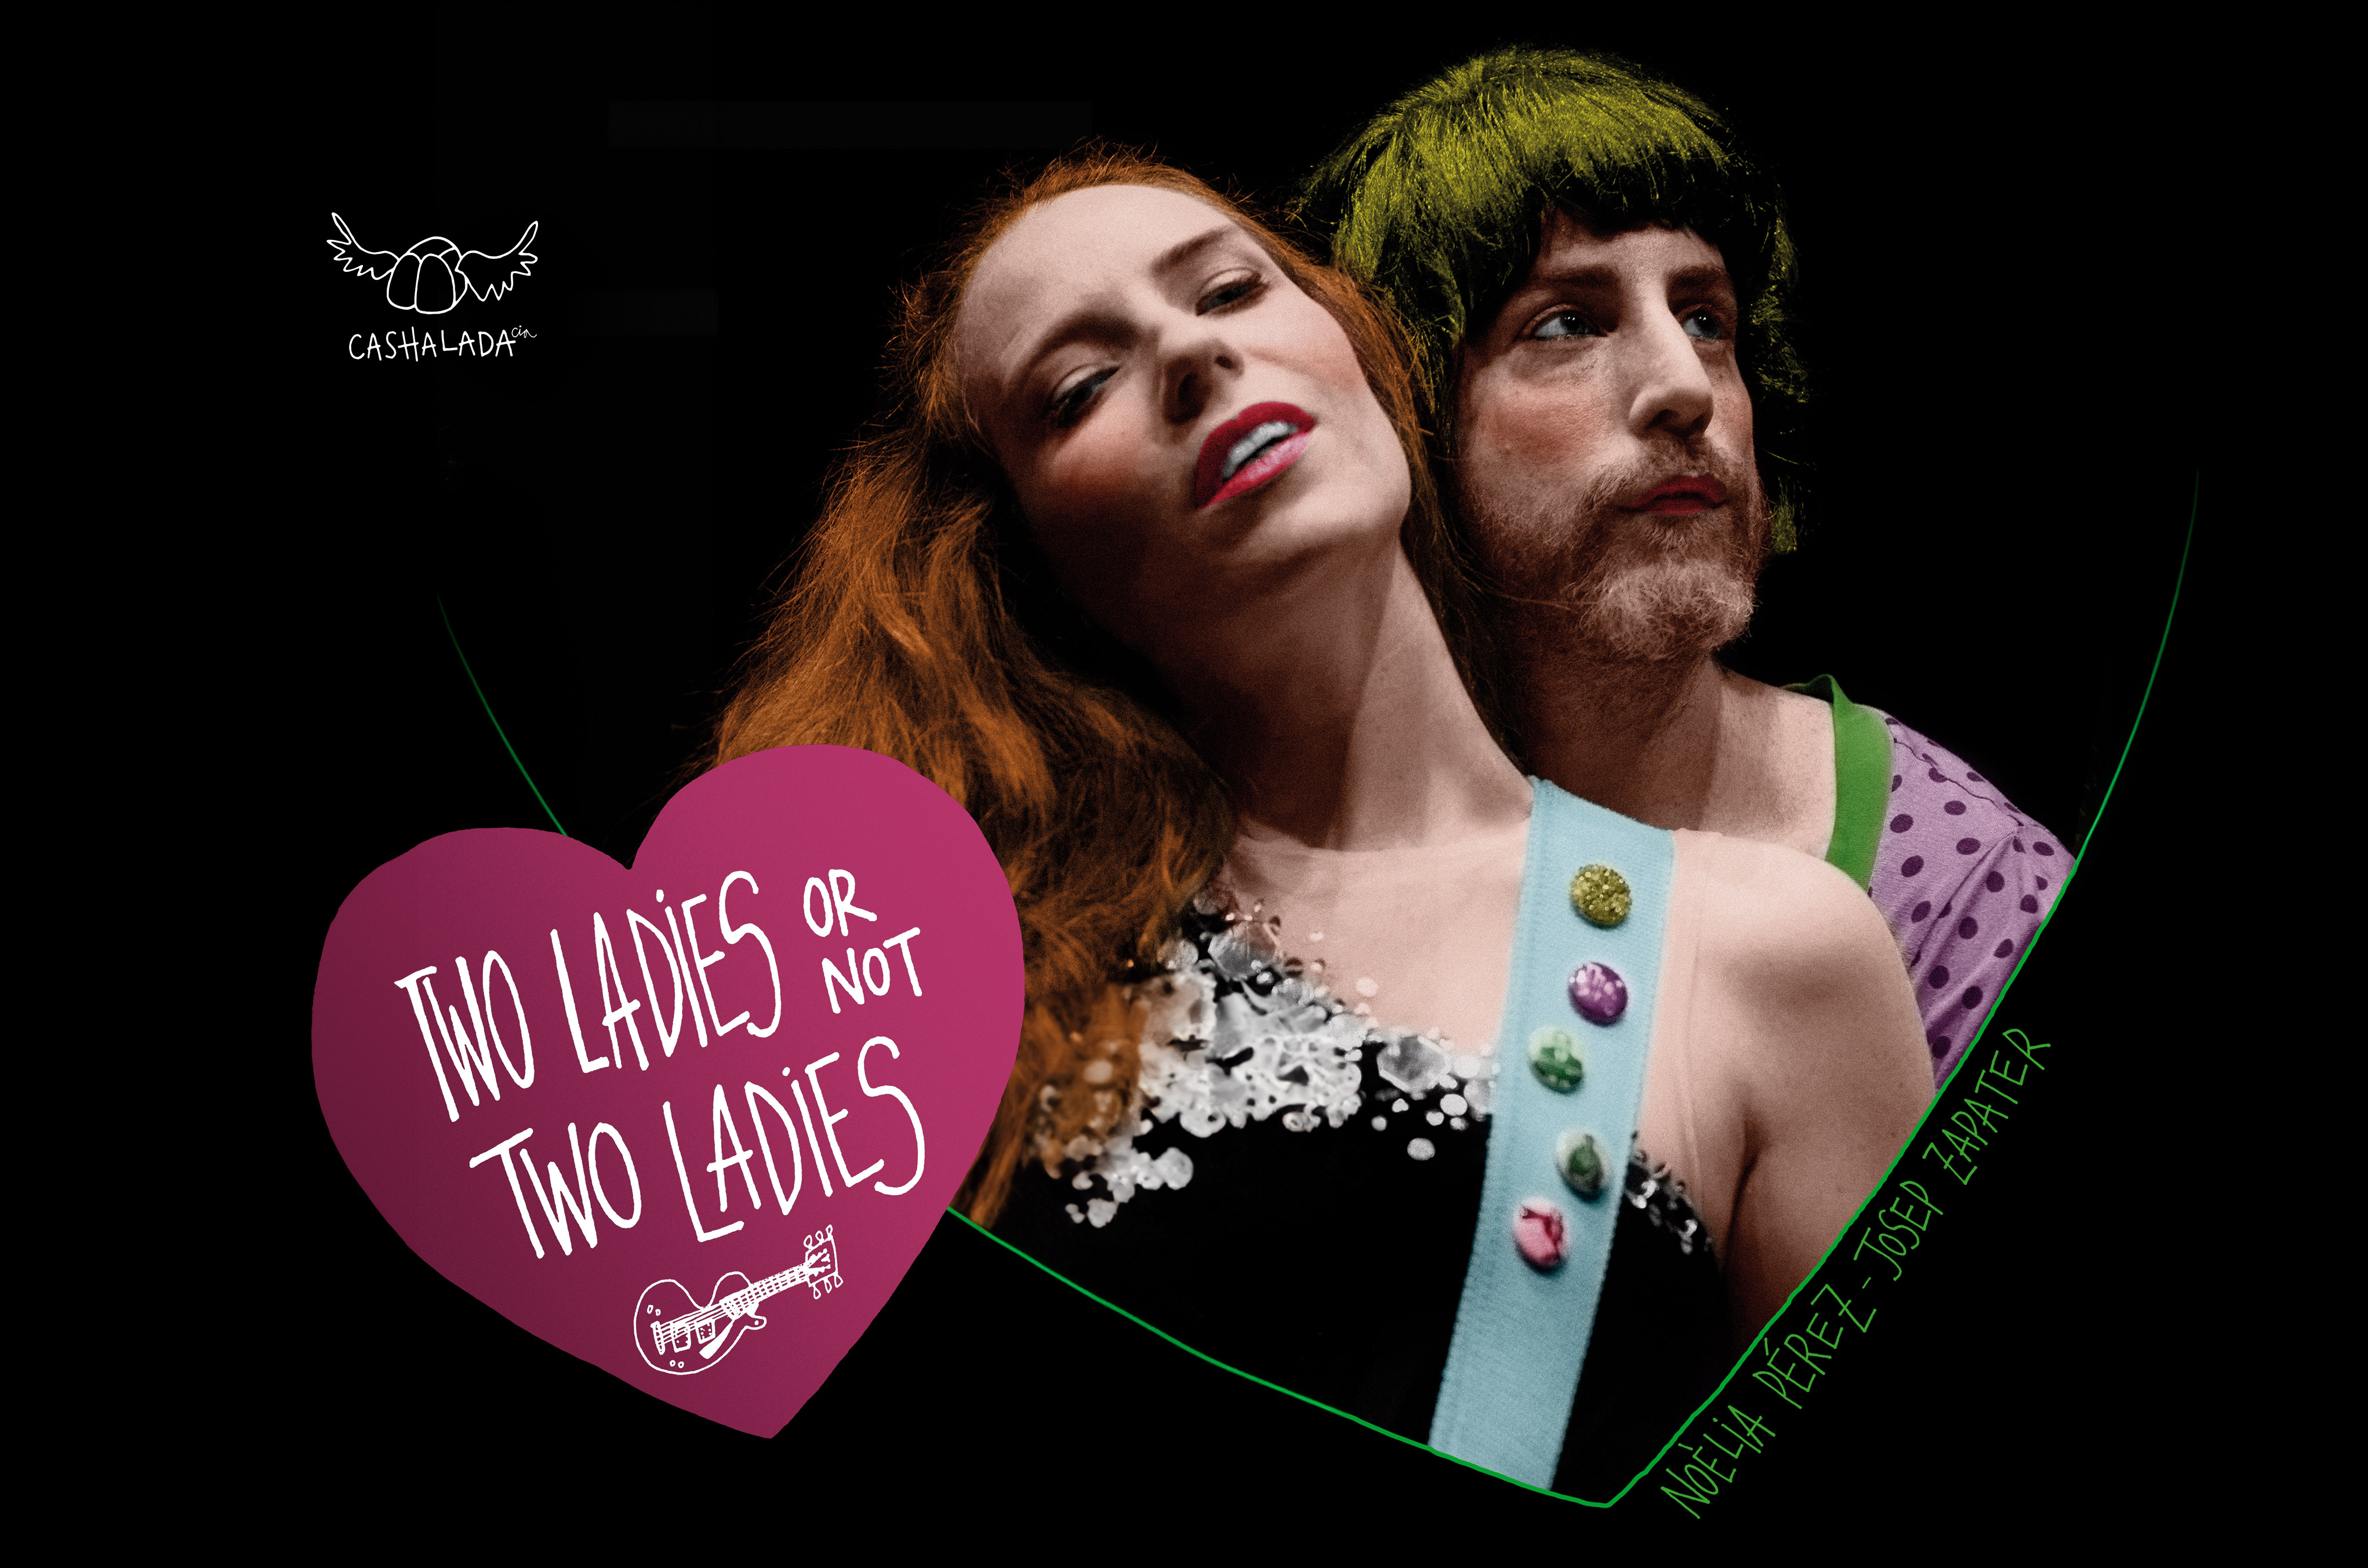 Portada two ladies or not two ladies cast